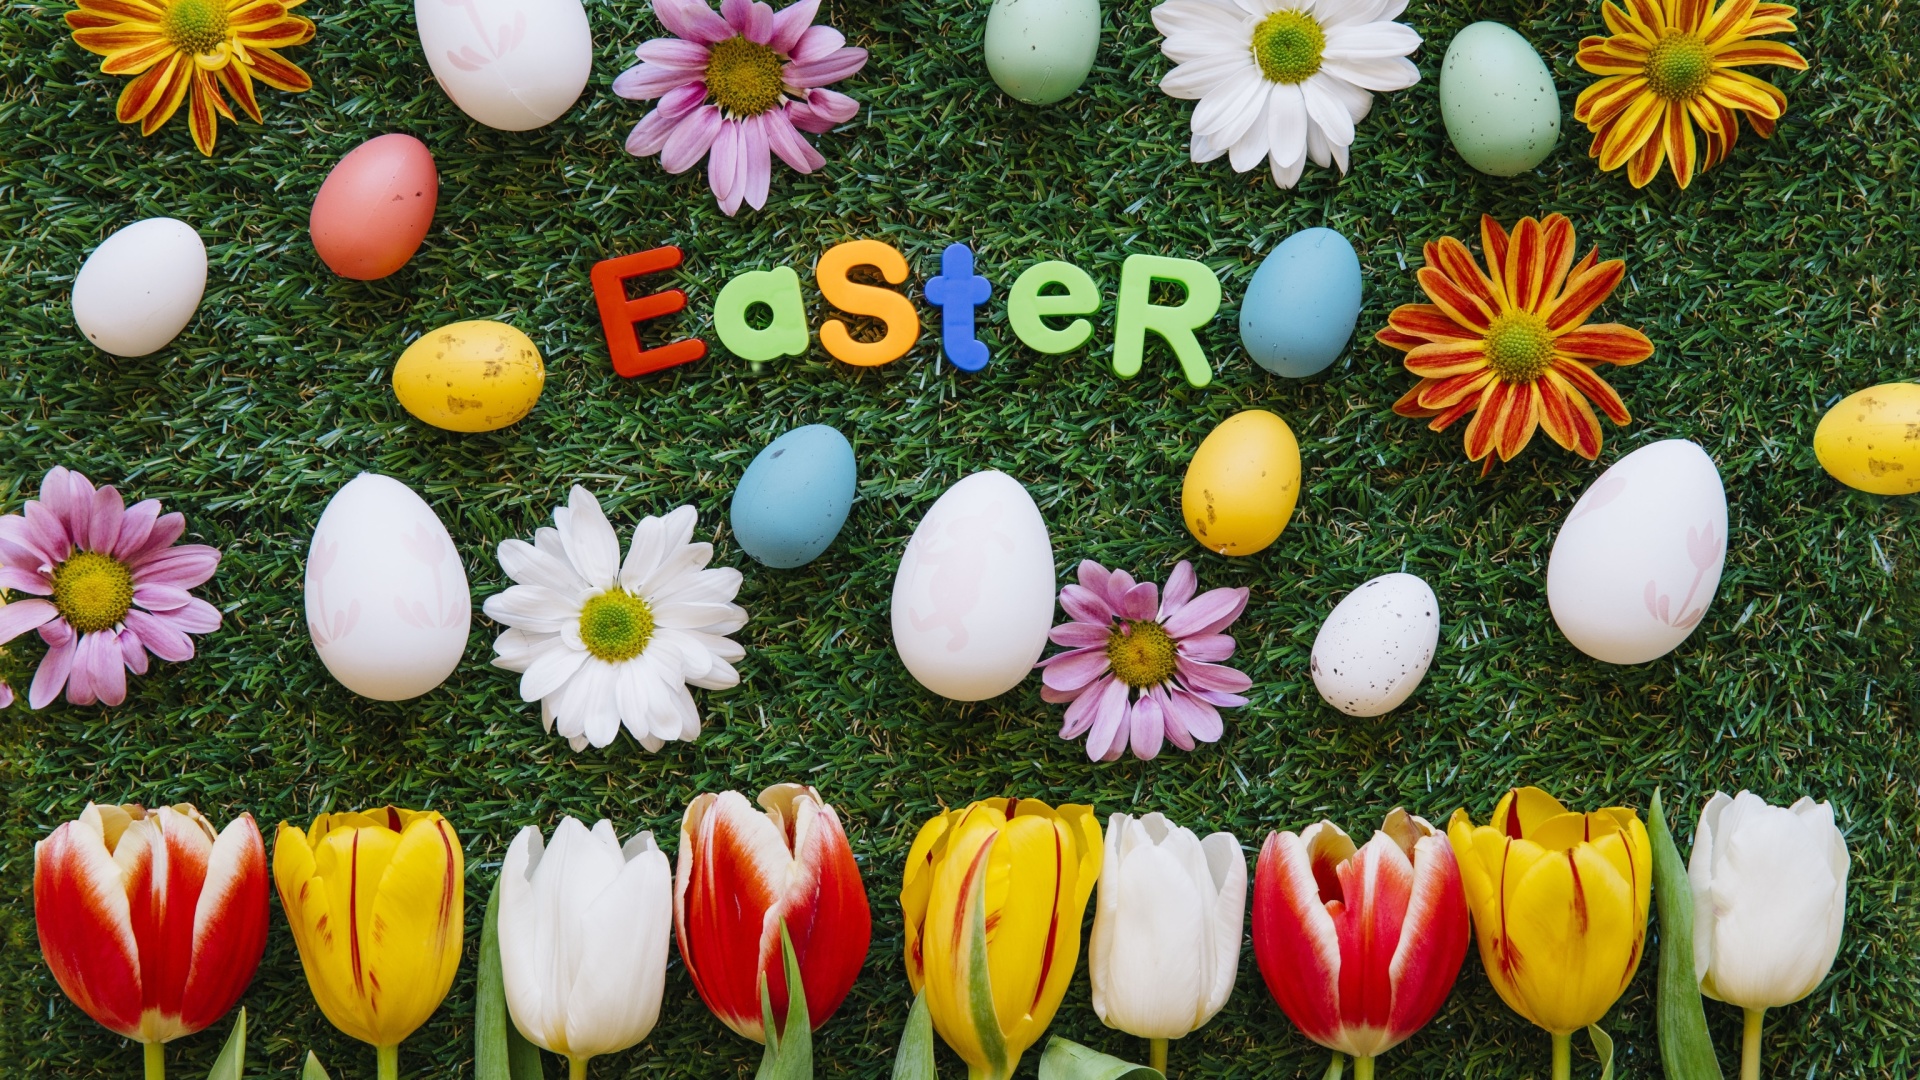 Easter Holiday wallpaper 1920x1080